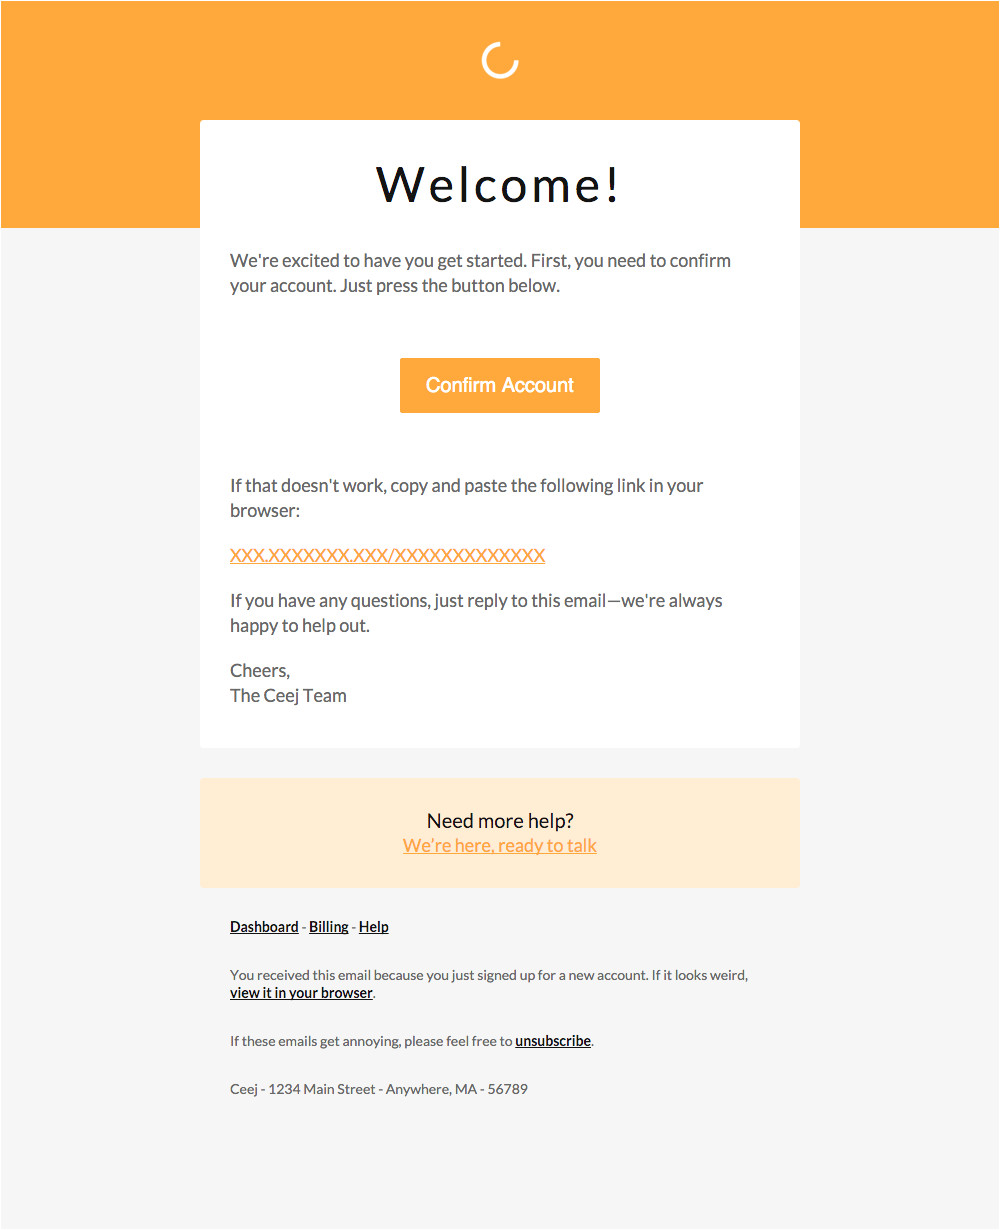 25 free responsive hybrid mobile aware email templates